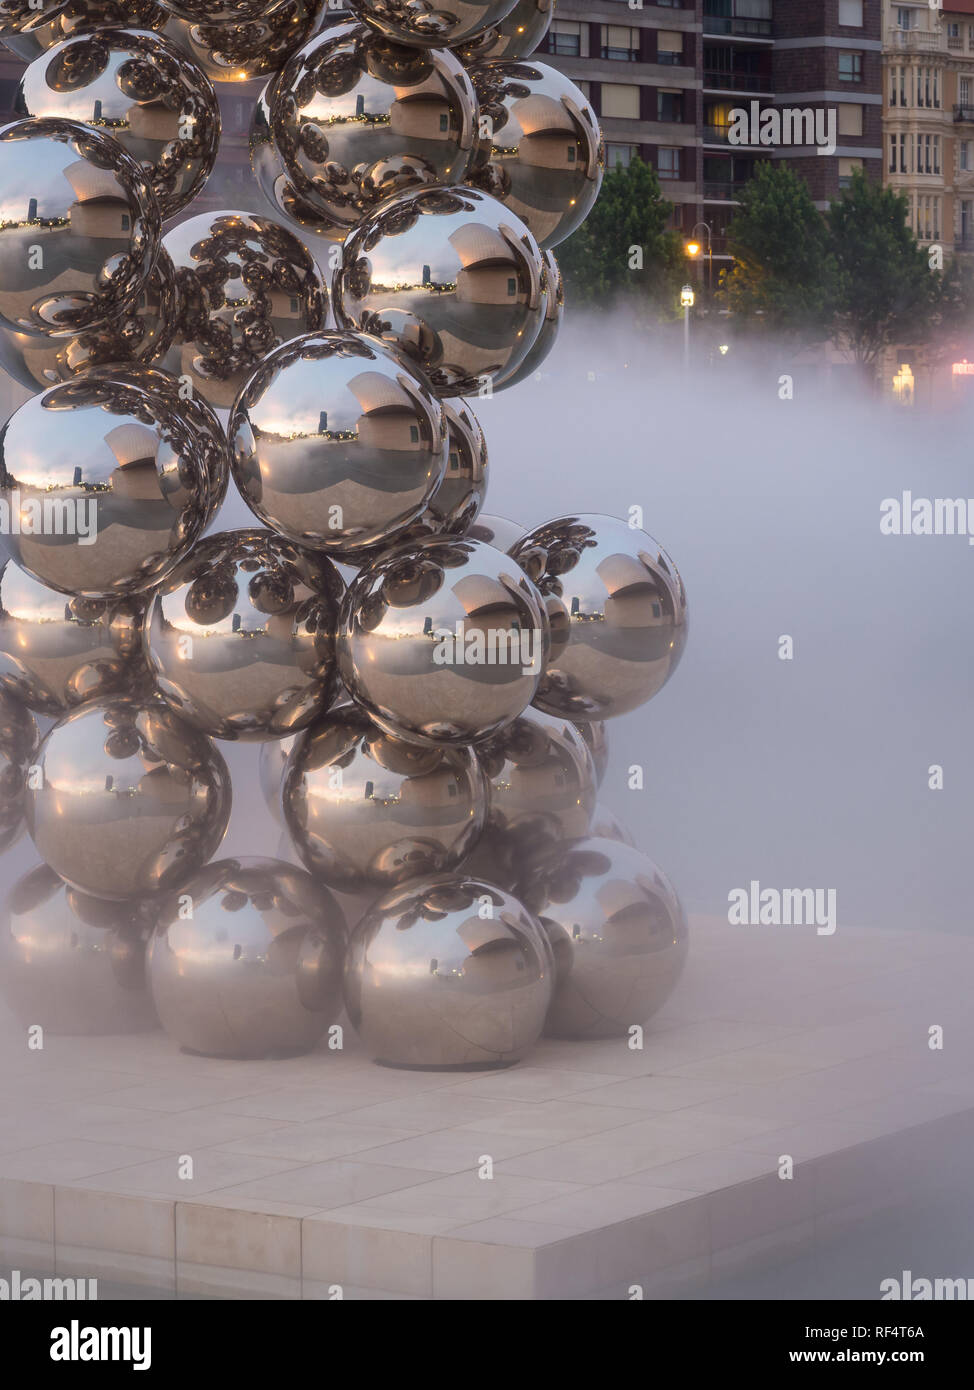 BILBAO, SPAIN - JULY 08, 2018: Sculpture 'The Big Tree' consisting of 80 stainless steel balls with reflections by Anish Kapoor in front of The Guggen Stock Photo